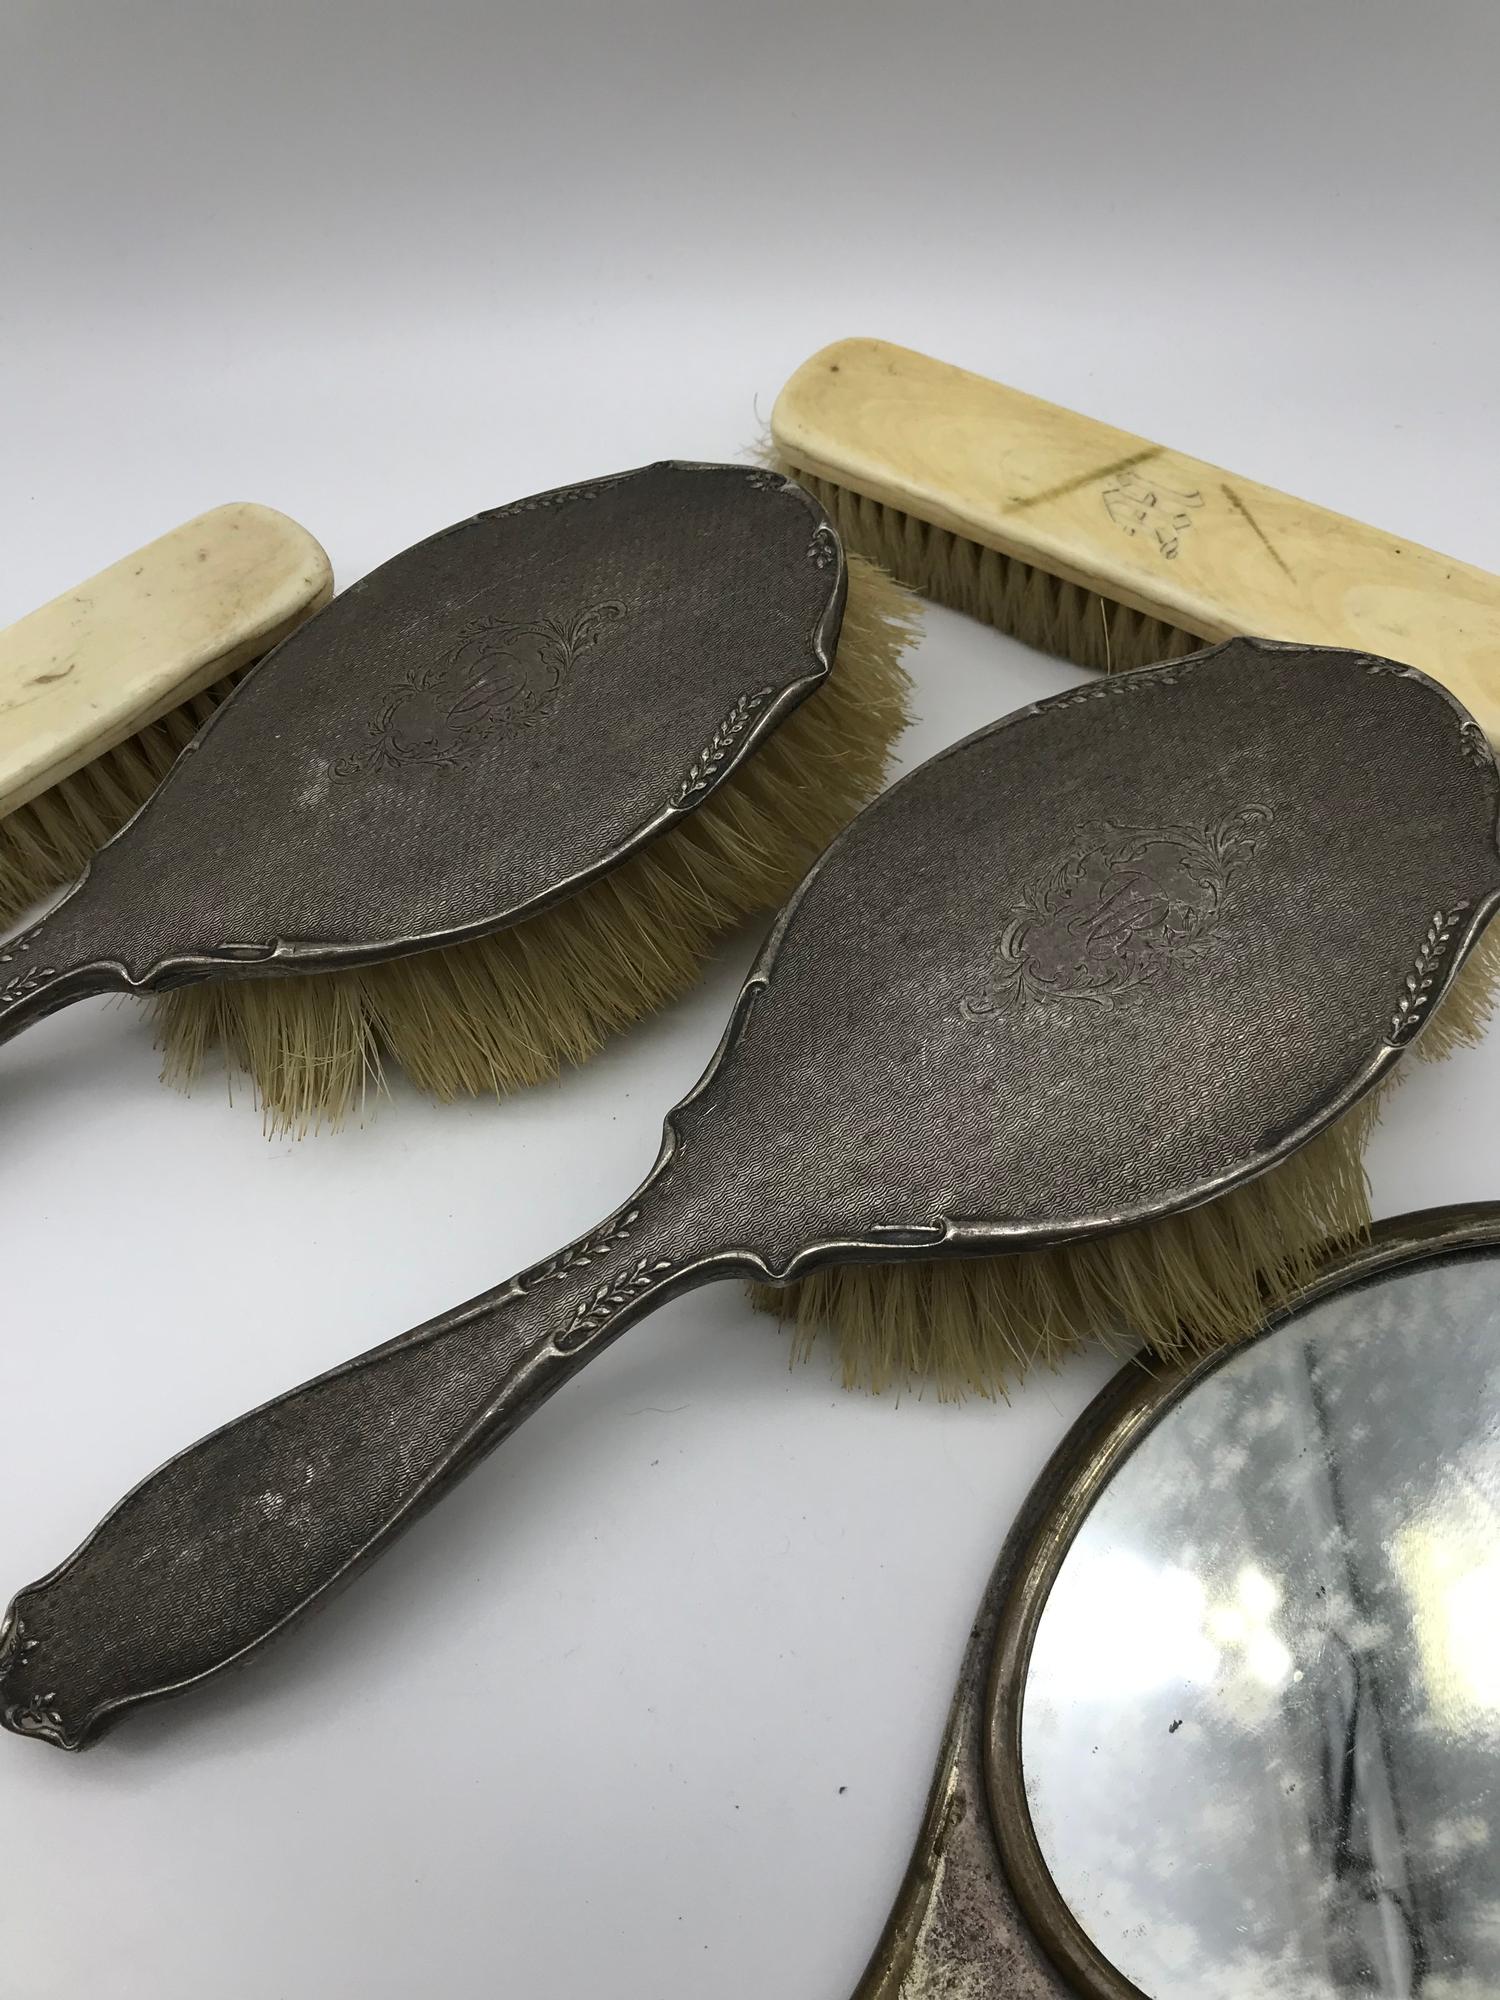 A Lot of 2 Sheffield silver brushes, Base metal mirror with gold initials and 3 other items. - Image 3 of 3